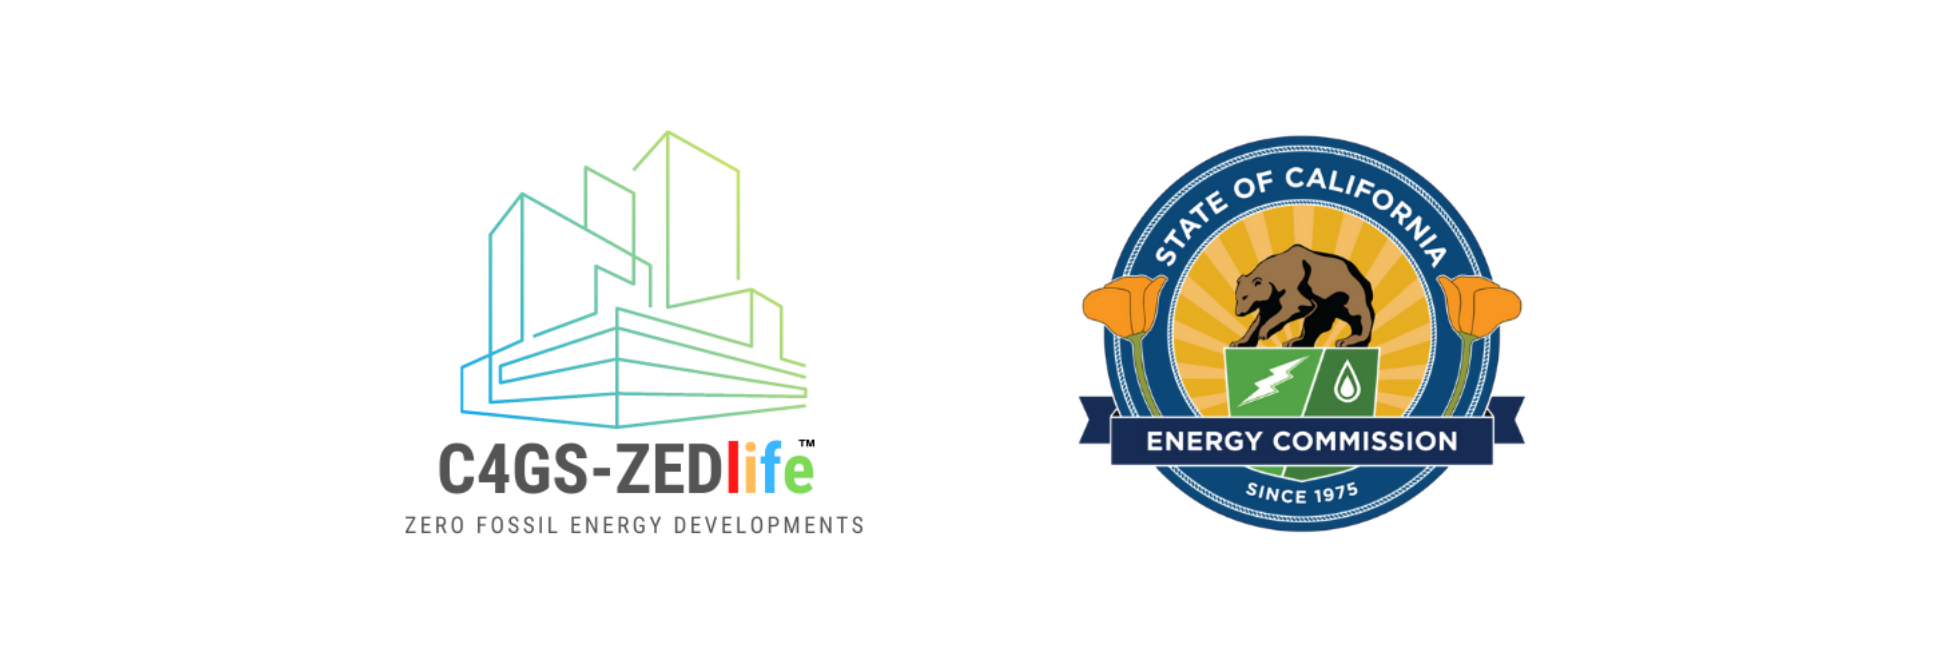 C4GS-ZEDlife Wins $1M Challenge to Bring Power for the People Through Innovative Sustainable Communities